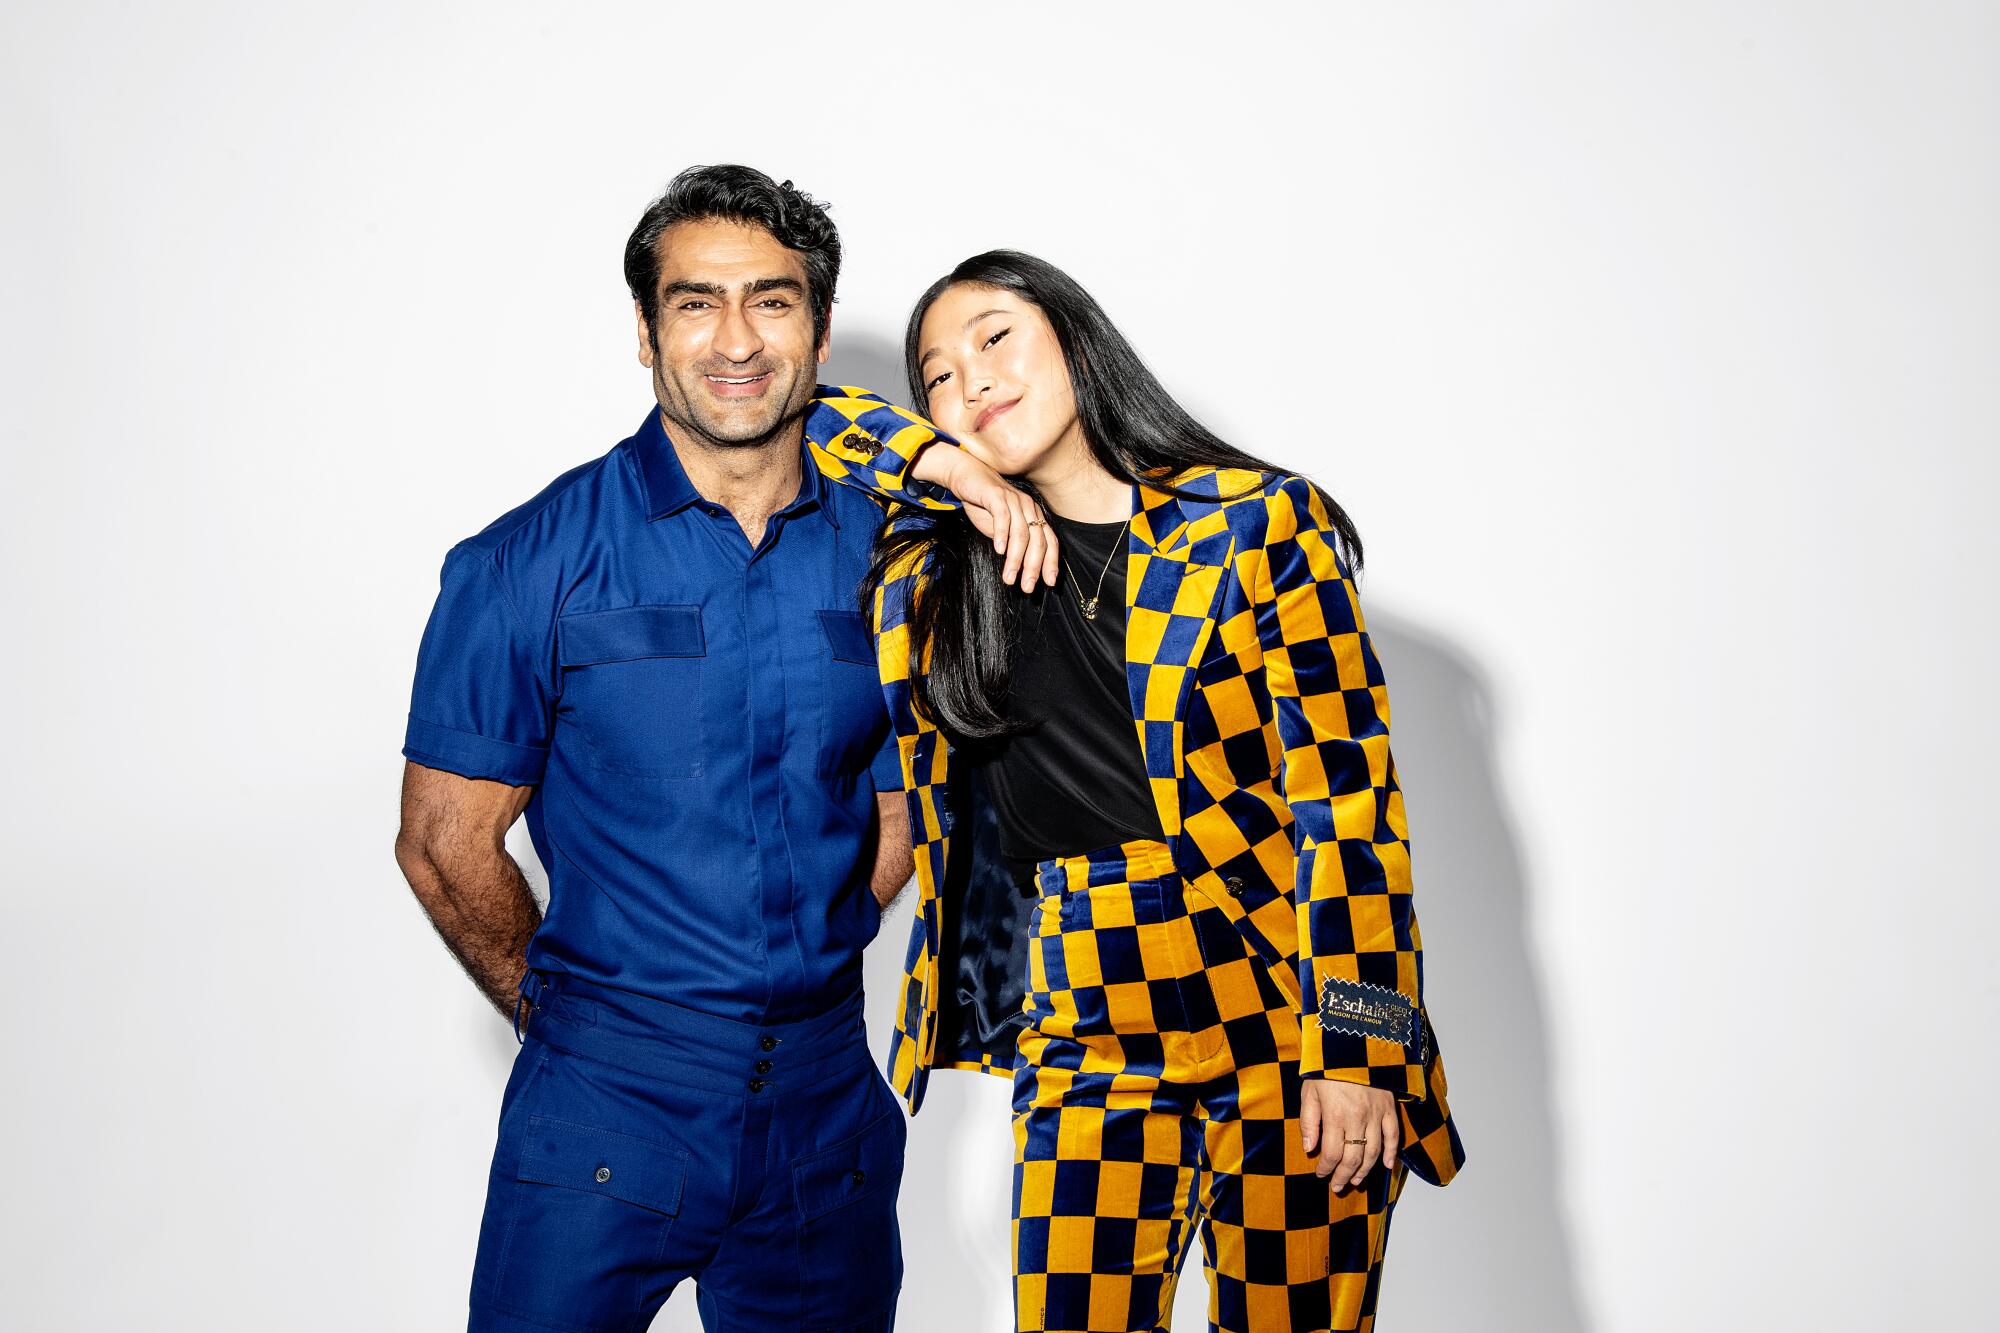 Kumail Nanjiani of "Eternals" and Awkwafina of "Shang-Chi and the Legend of the Ten Rings" are photographed in Los Angeles.